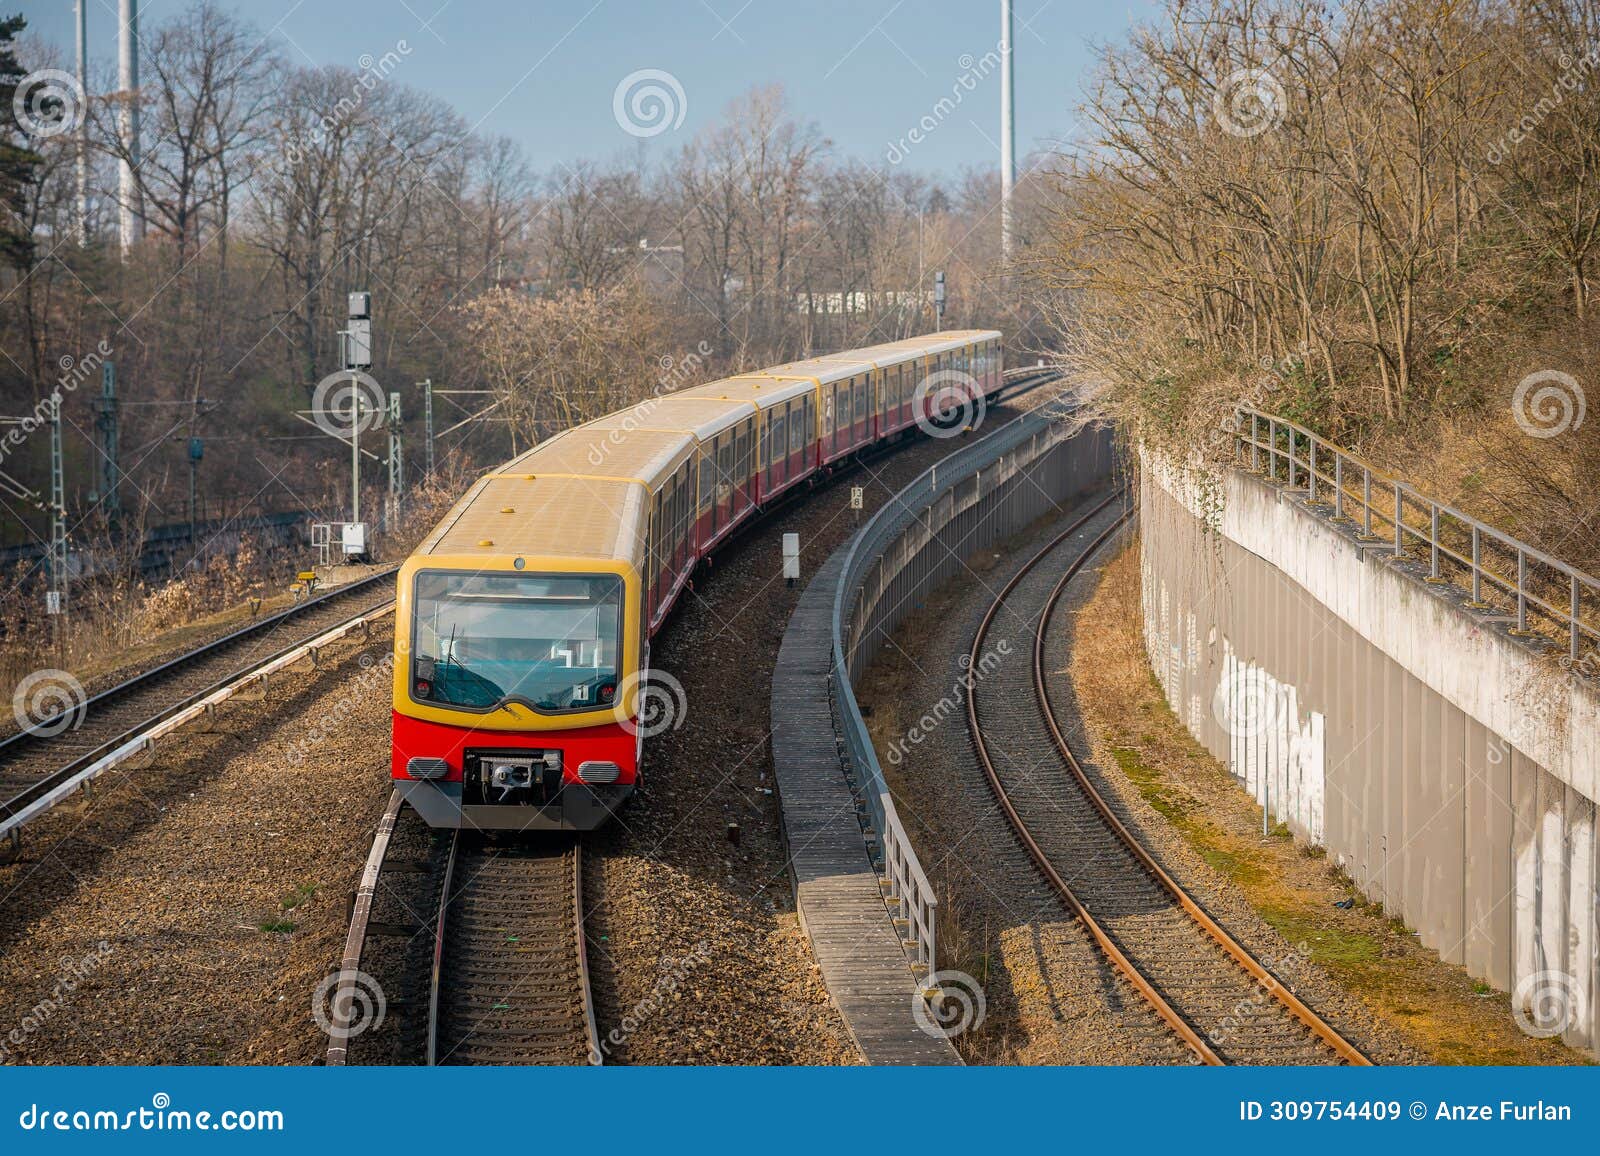 s bahn or suburban trains in berlin, germany. modern red and yellow train for commuting purposes, on station of messe sud on a